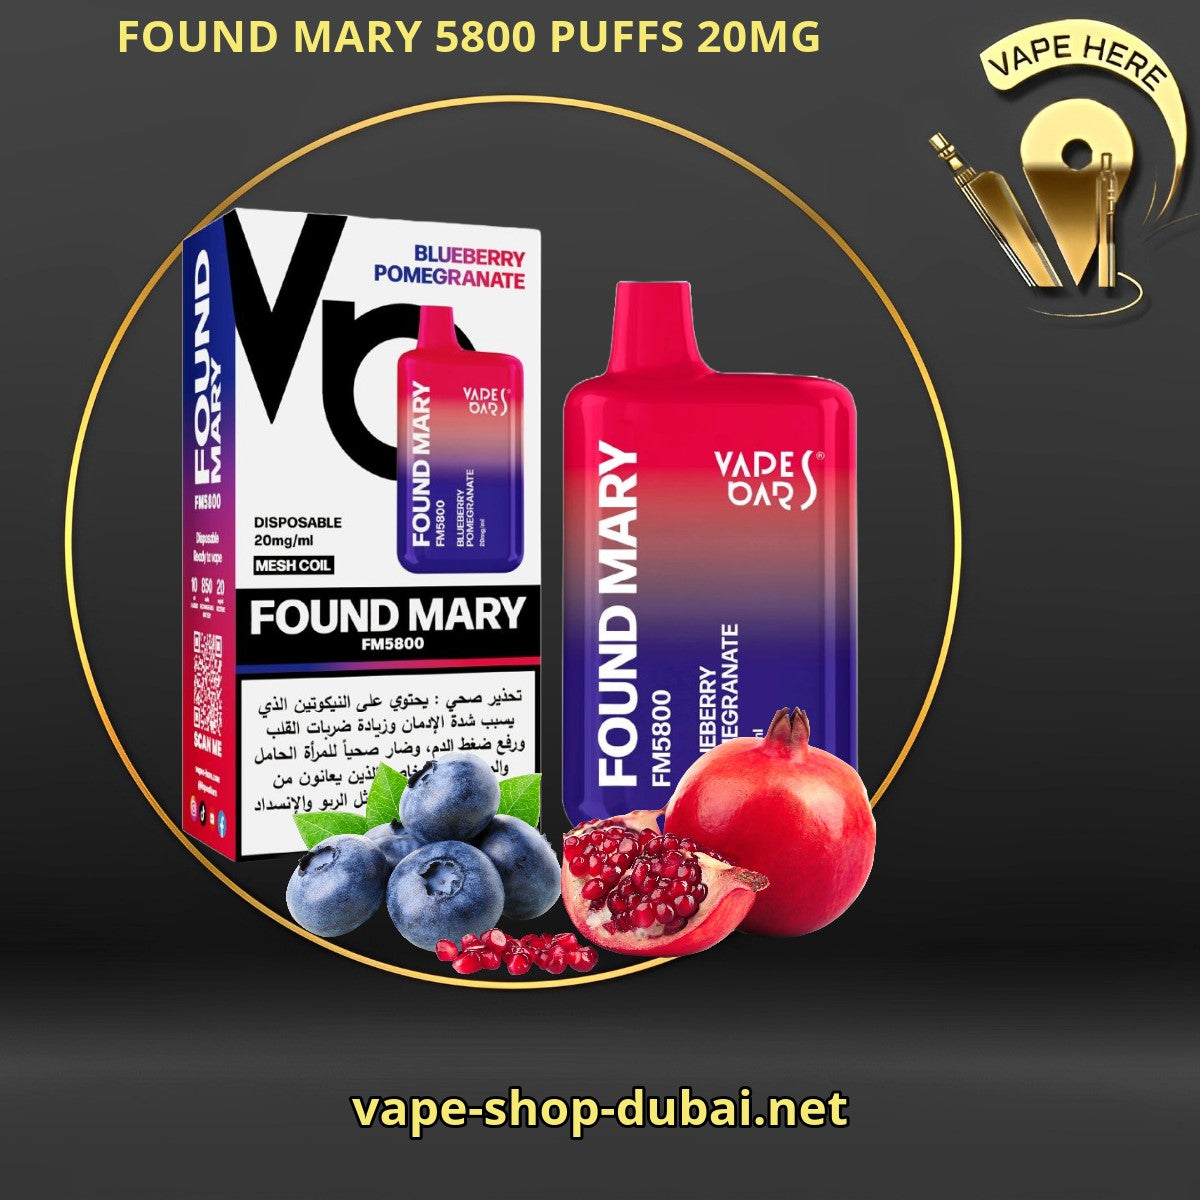 FOUND MARY FM 5800 PUFFS 20MG Blueberry Pomegranate DISPOSABLE VAPE BY VAPE BARS UAE Sharjah